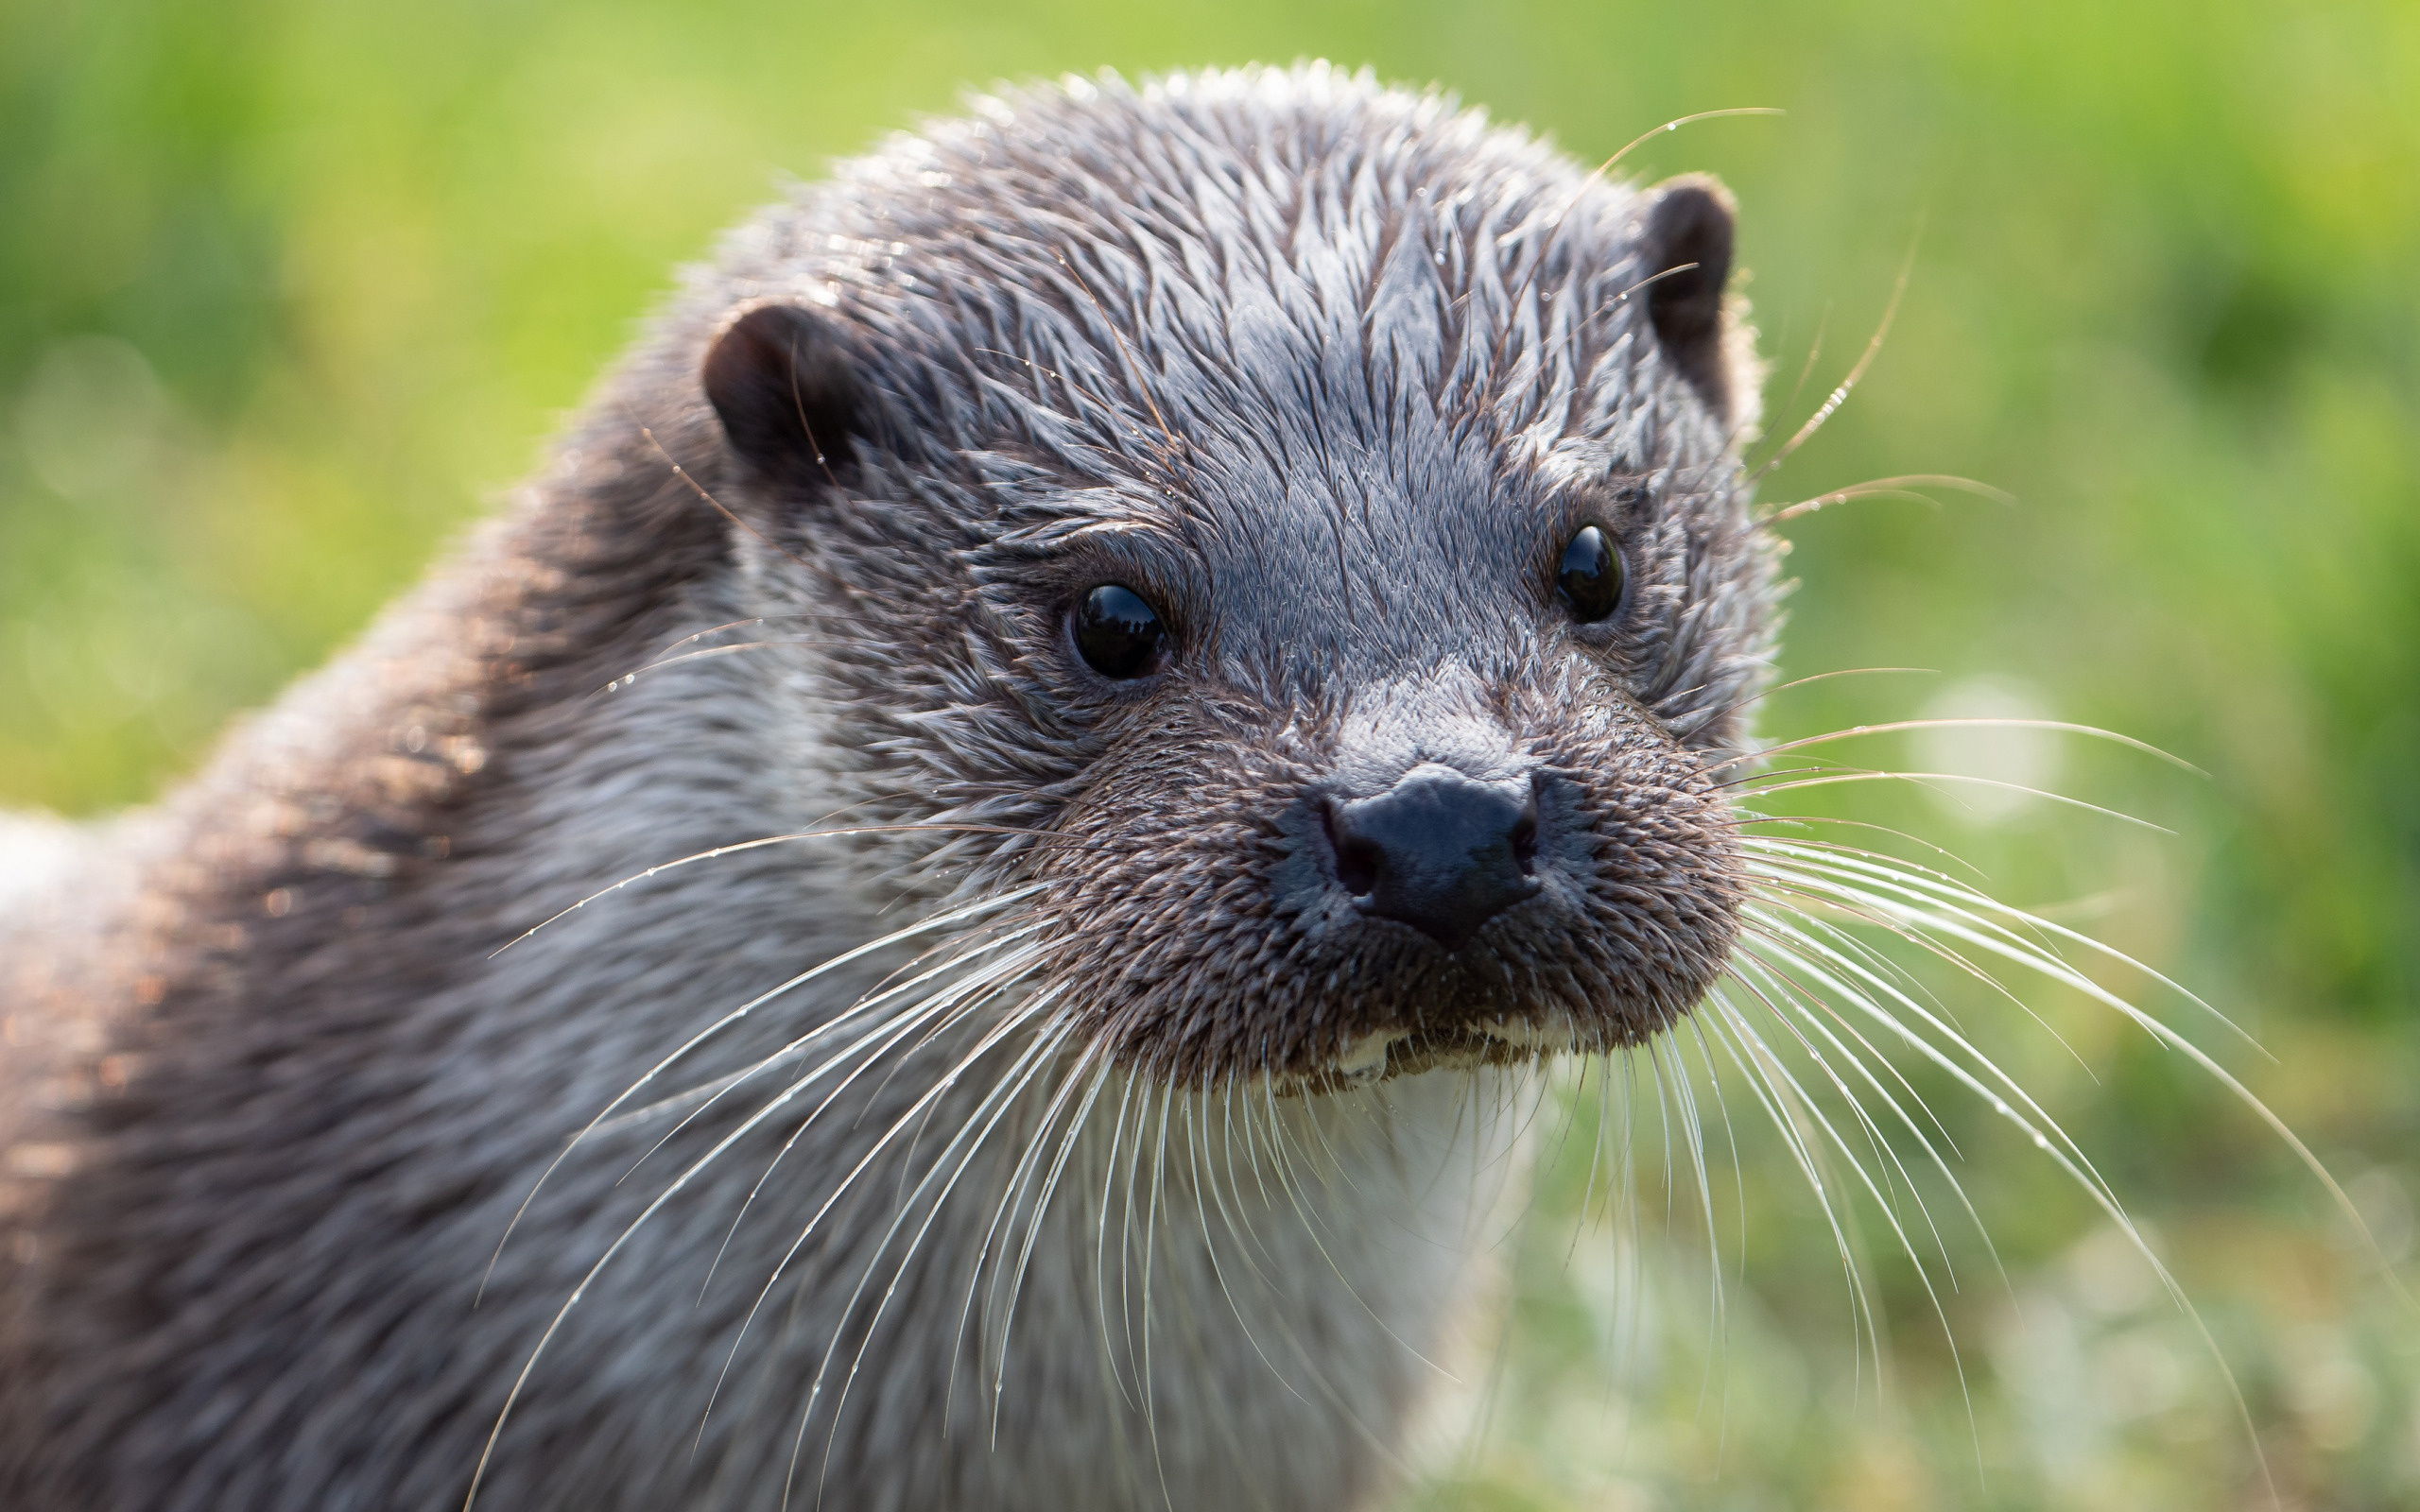 Mustache-clad otter marvel, Unique and charming, Quirky animal portrait, Stand out with otter style, 2560x1600 HD Desktop